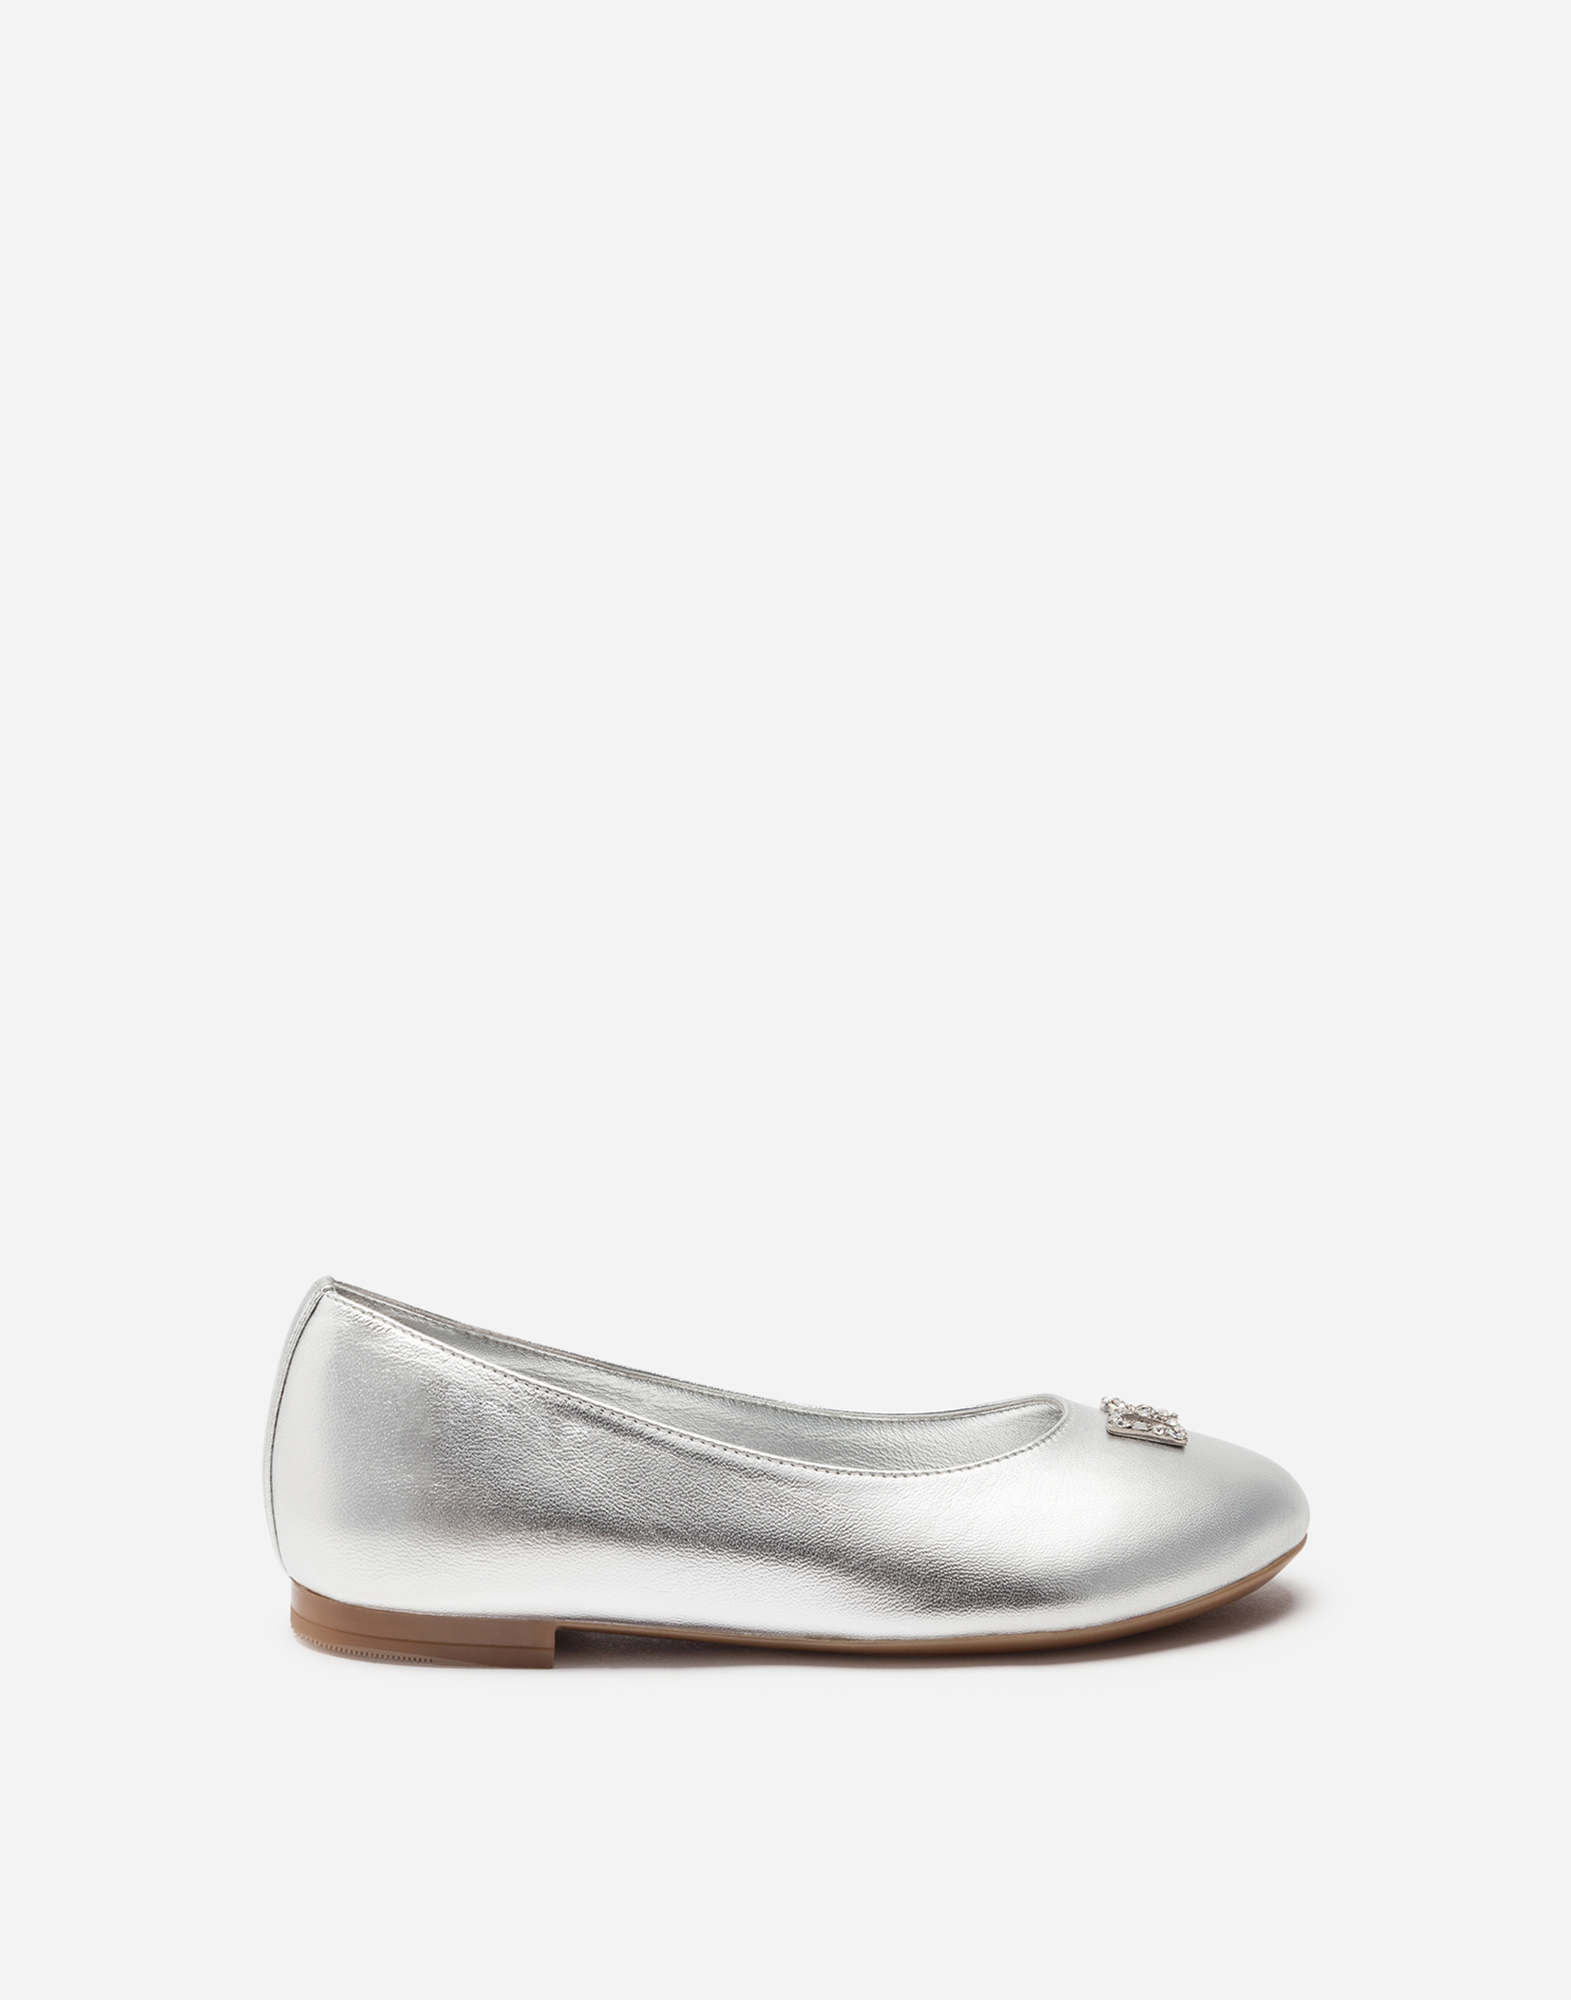 Foiled nappa leather ballet flats in Silver